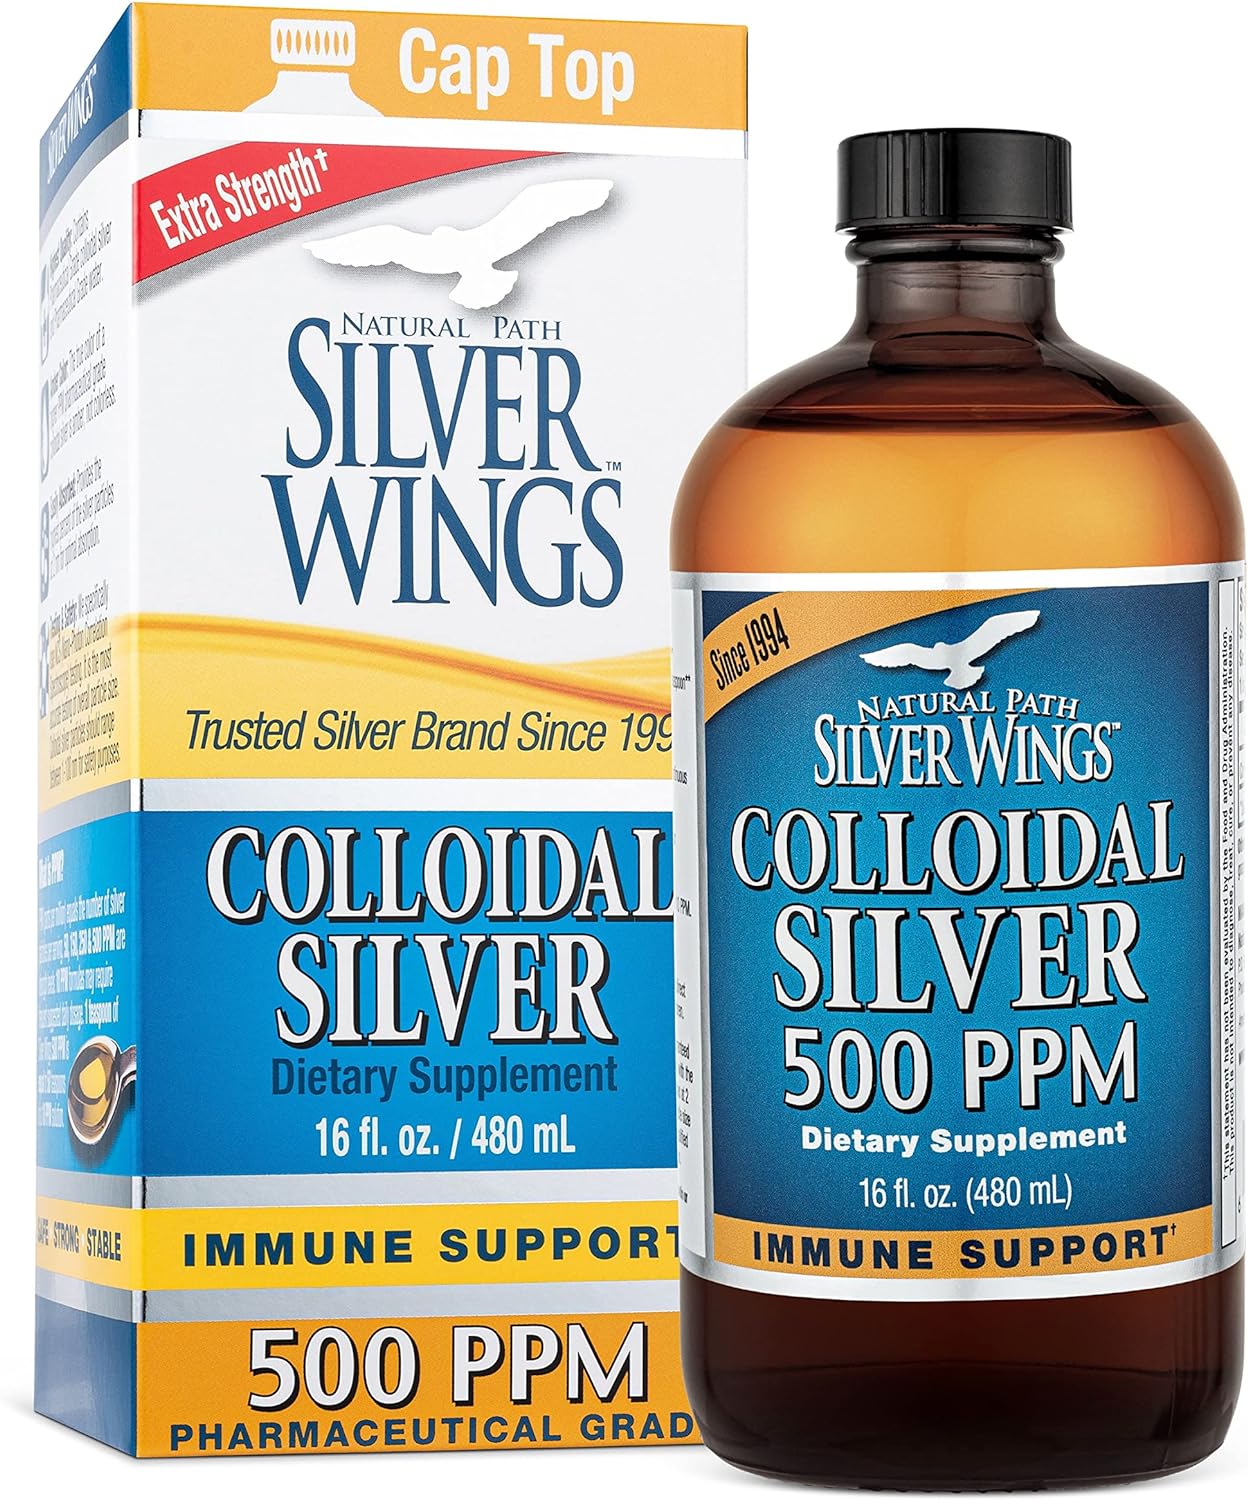 Natural Path Silver Wings Colloidal Silver 500ppm (2,500mcg) Immune Support Supplement 16 fl. oz